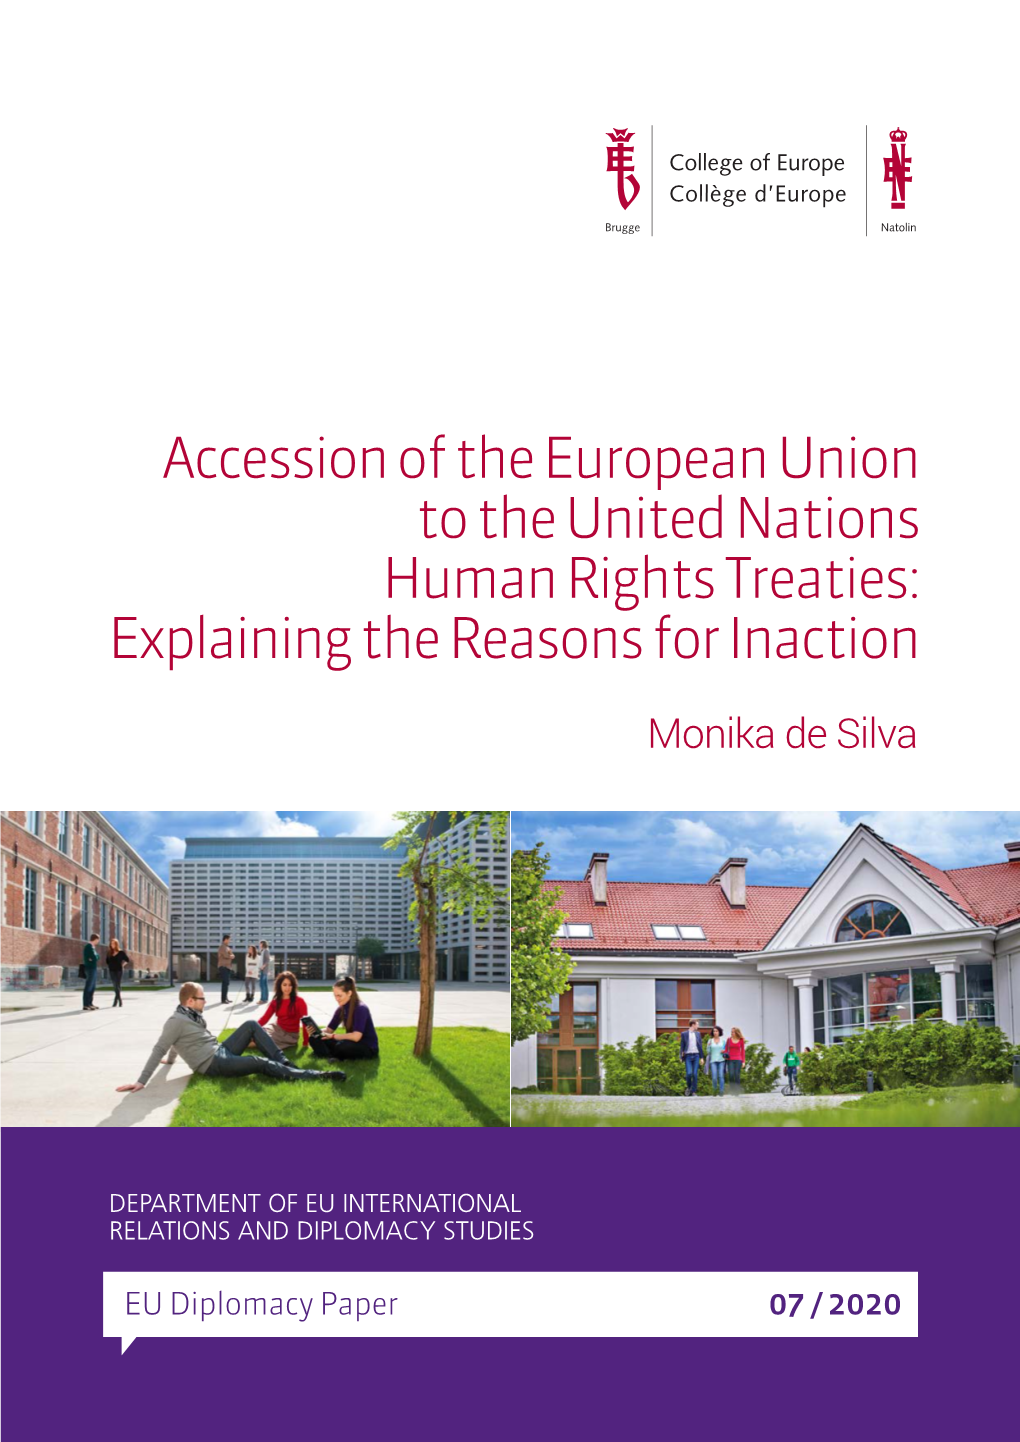 Accession of the European Union to the United Nations Human Rights Treaties: Explaining the Reasons for Inaction